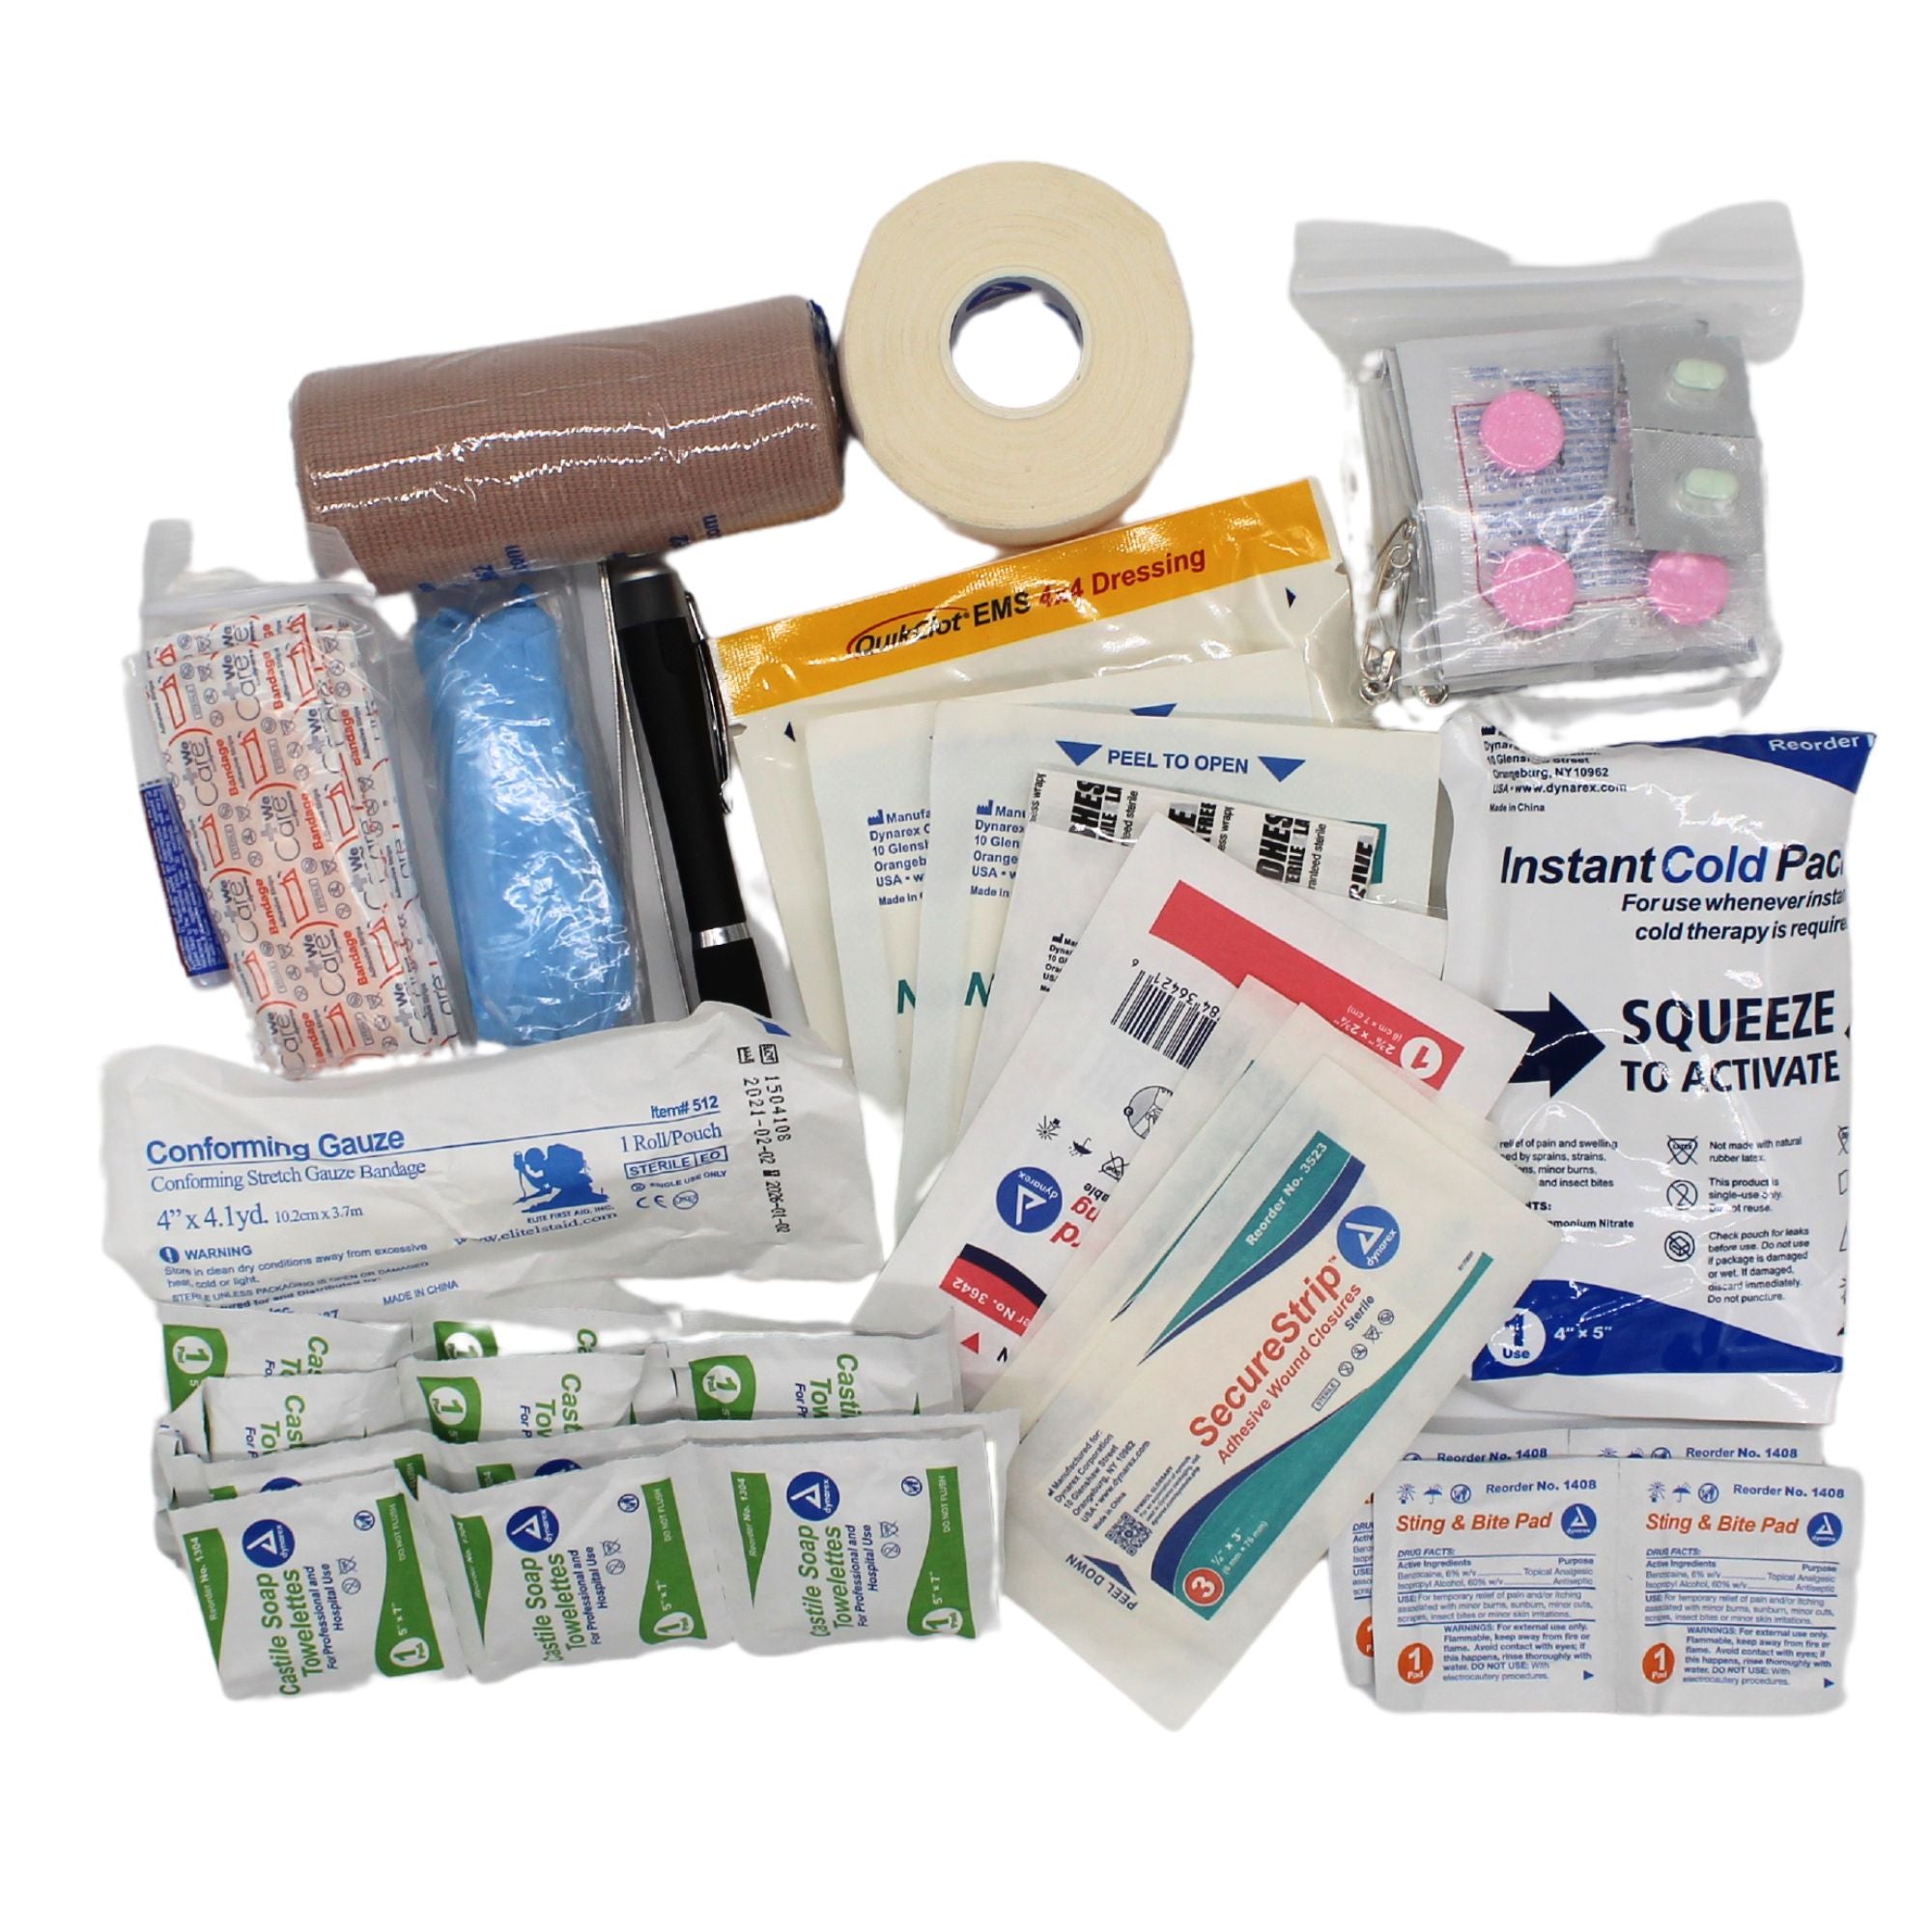 ViTAC First Aid Supply Refill Kit VF – Vehicle